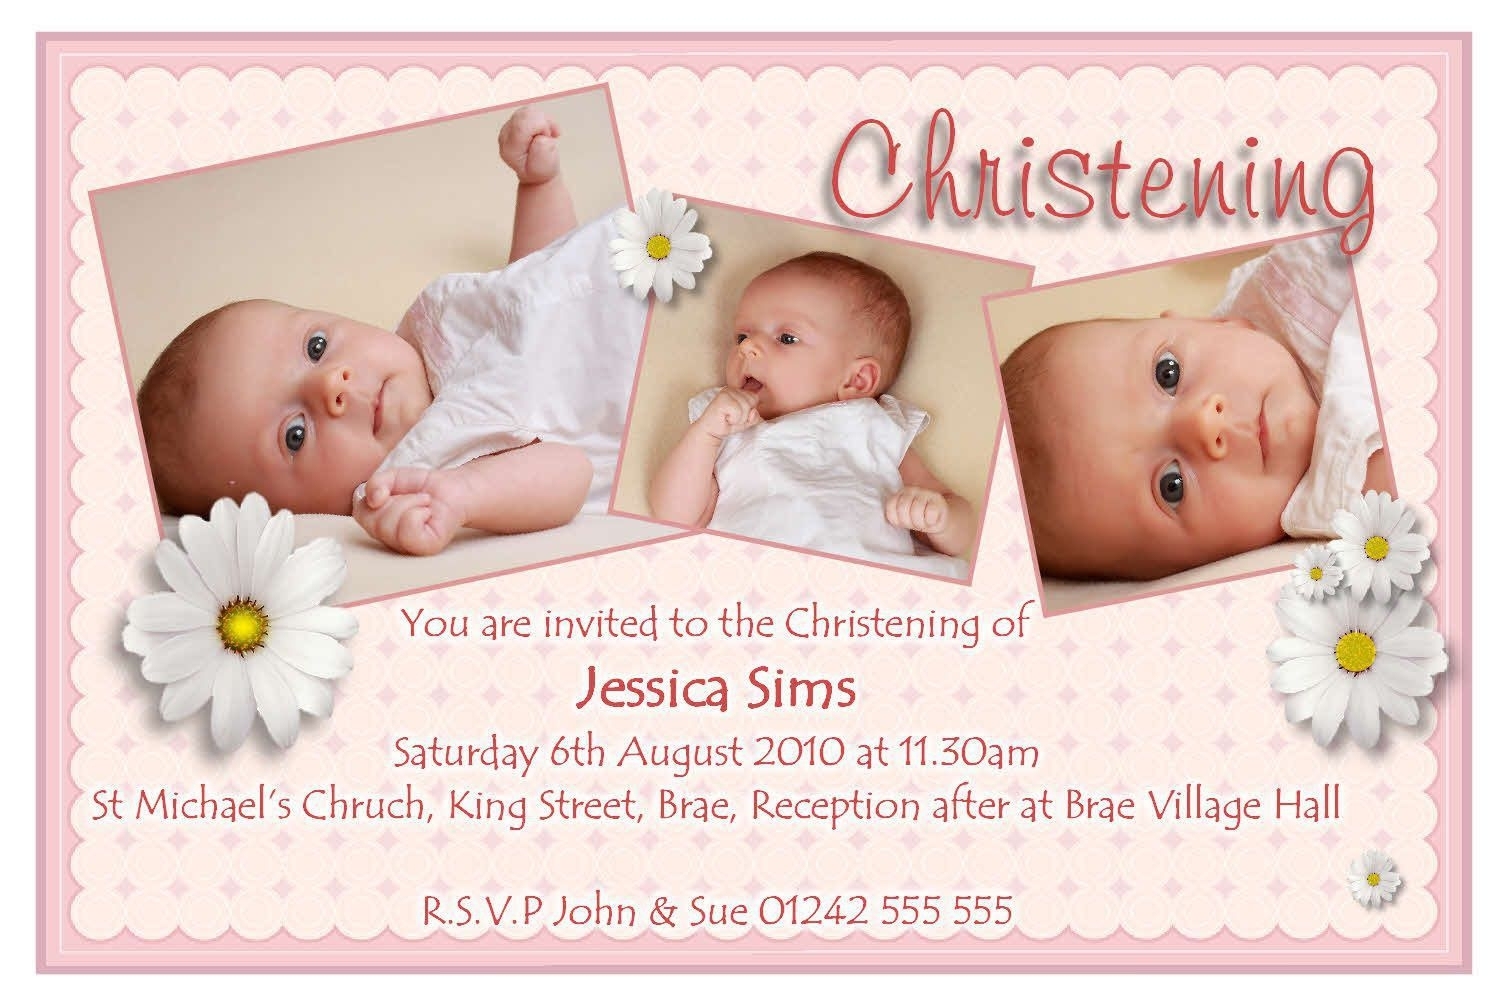 Christening Invitations Template • Business Template Ideas Throughout Blank Christening Invitation Templates